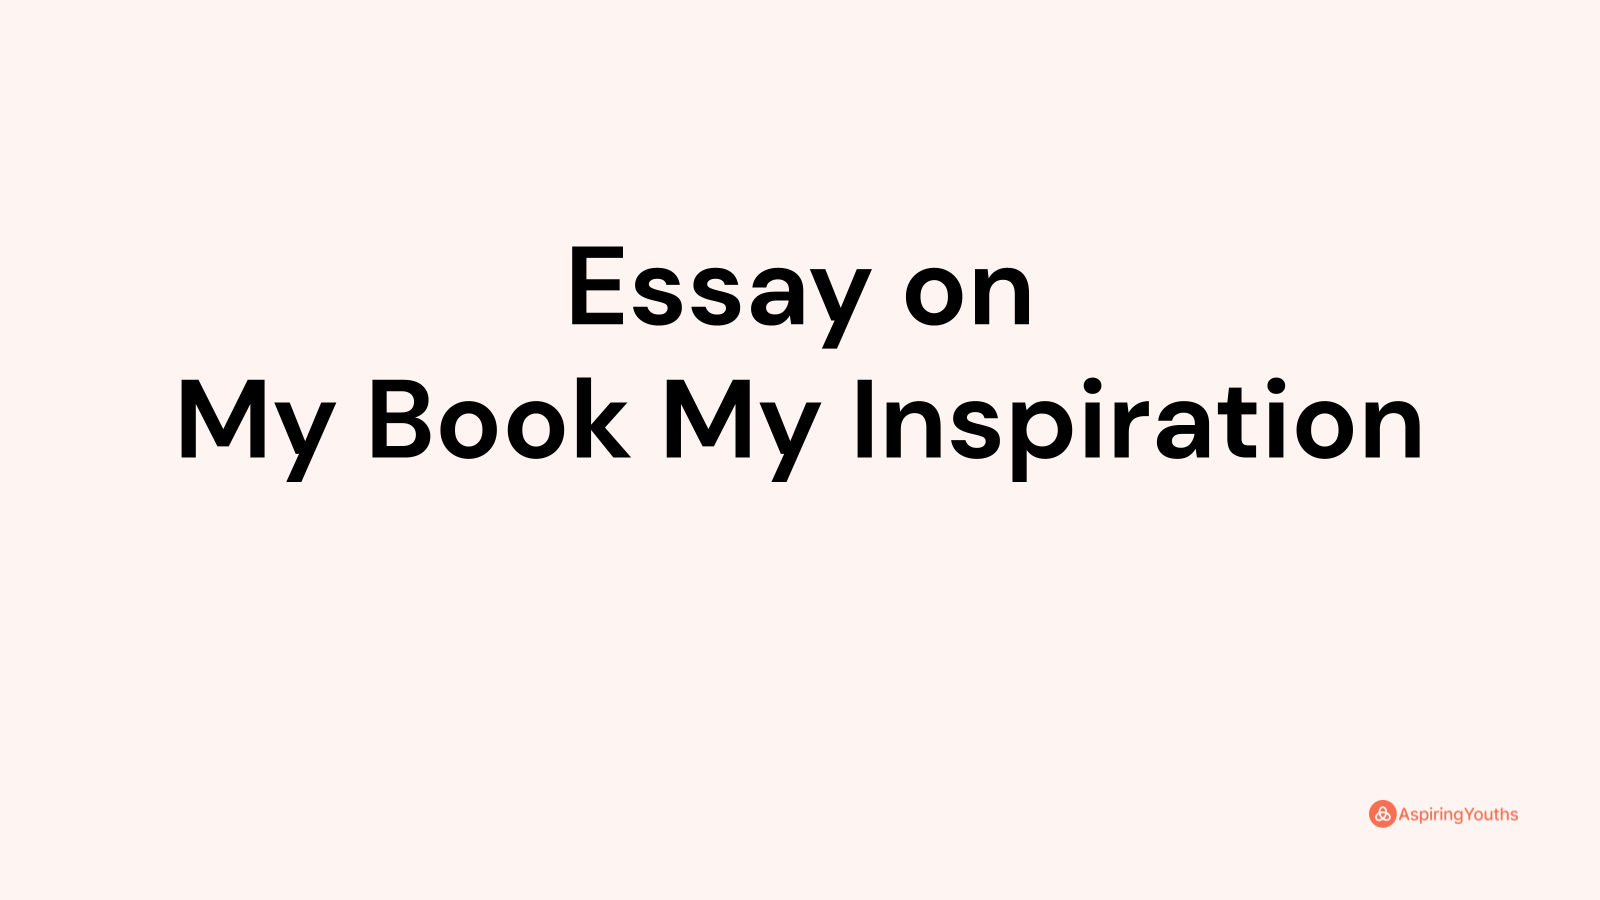 write an essay on my book my inspiration